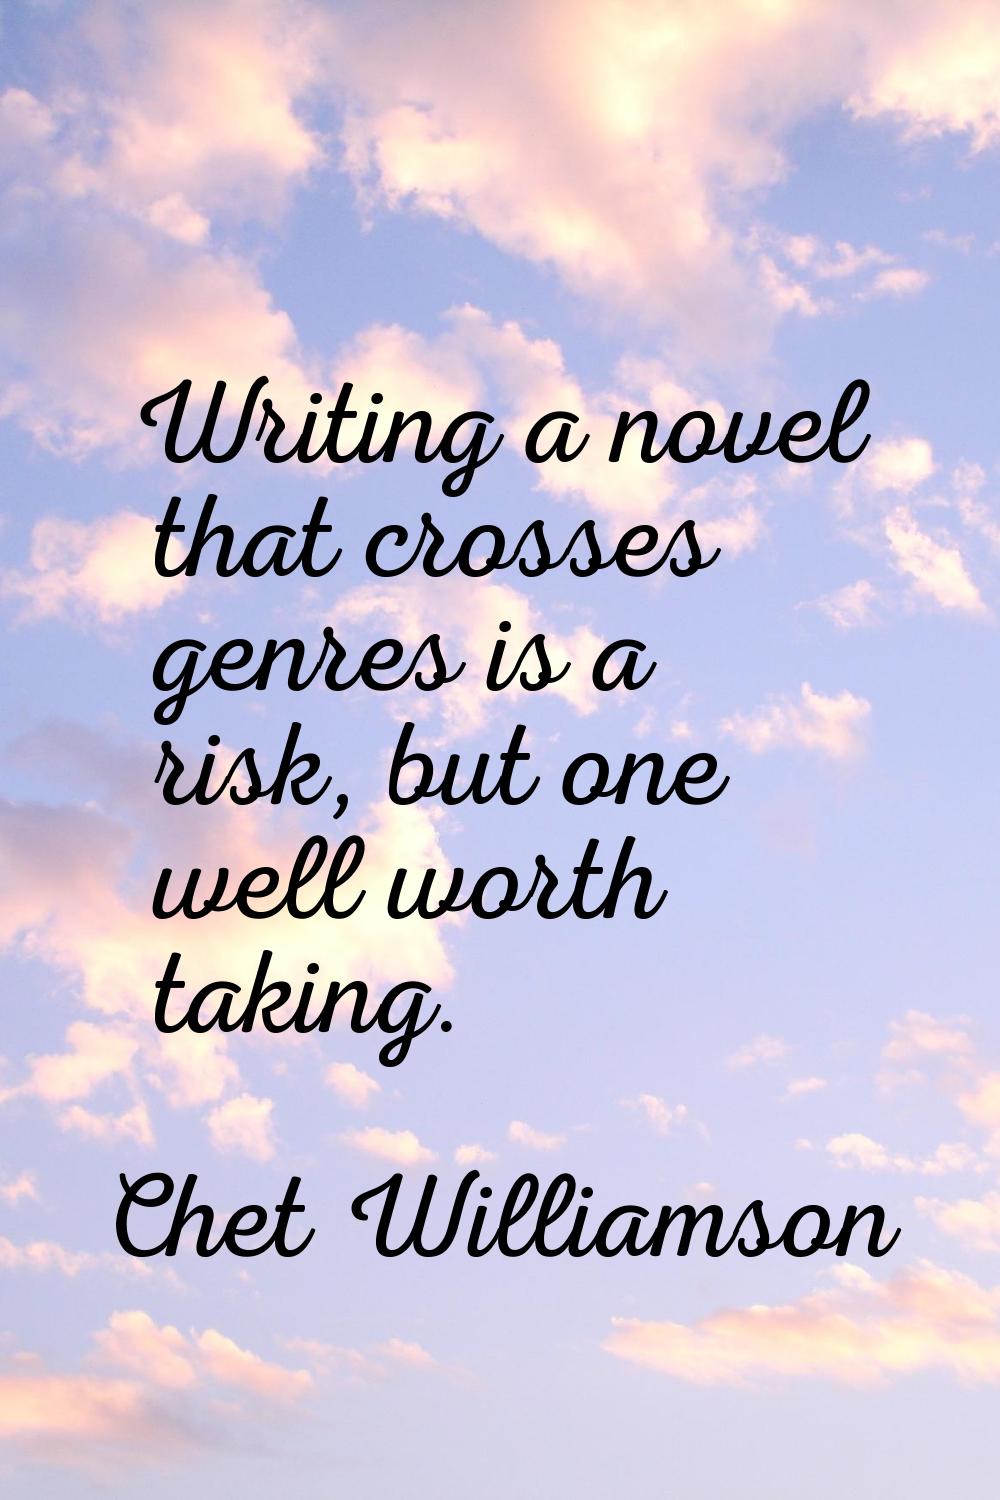 Writing a novel that crosses genres is a risk, but one well worth taking.